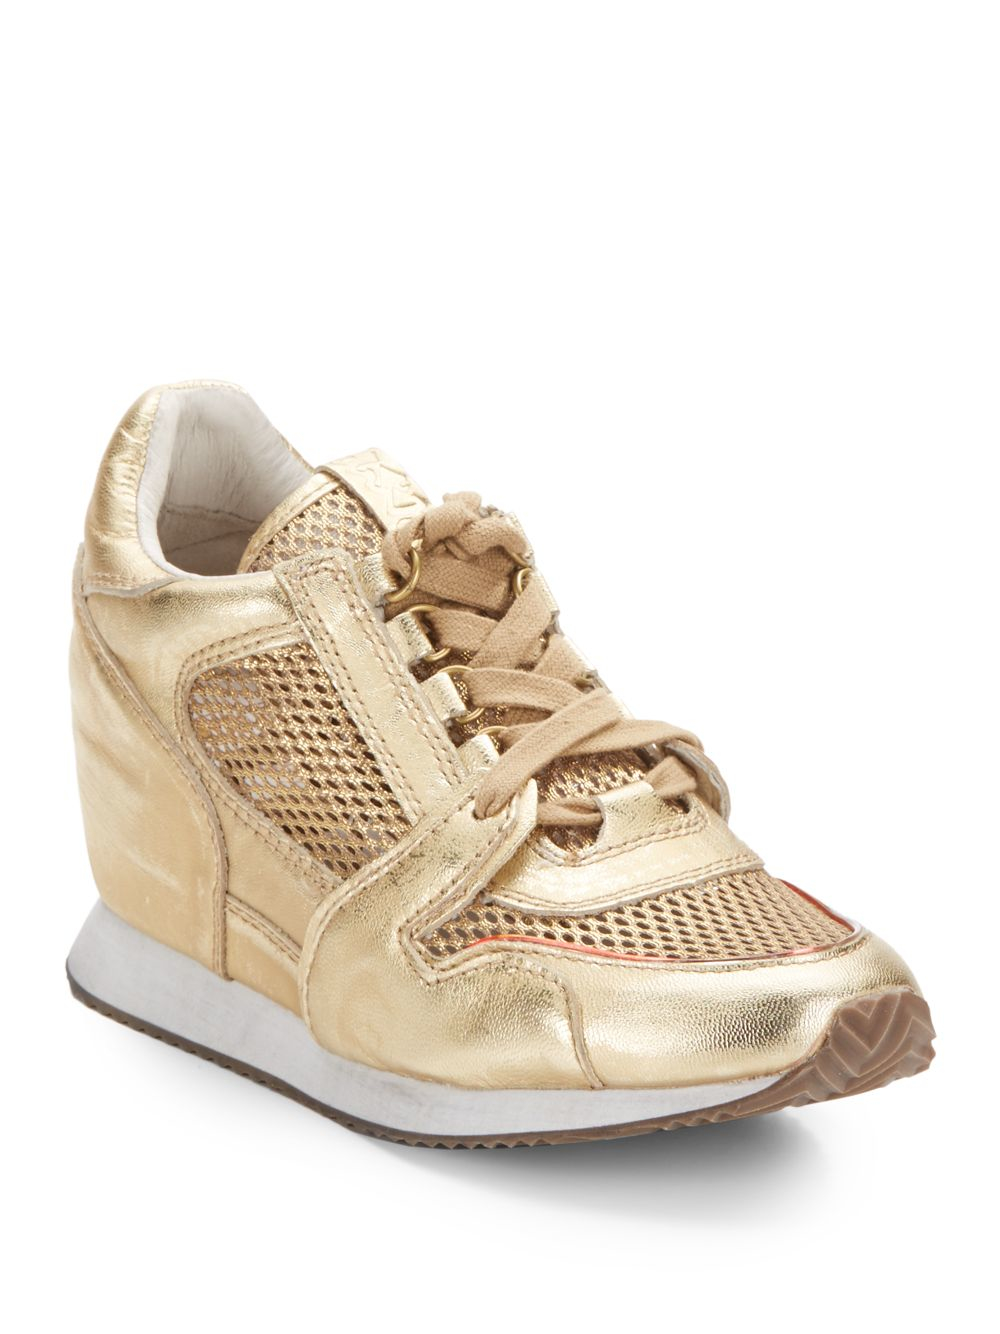 Ash Dean Mesh Paneled-leather Wedge Sneakers in Gold (Metallic) | Lyst